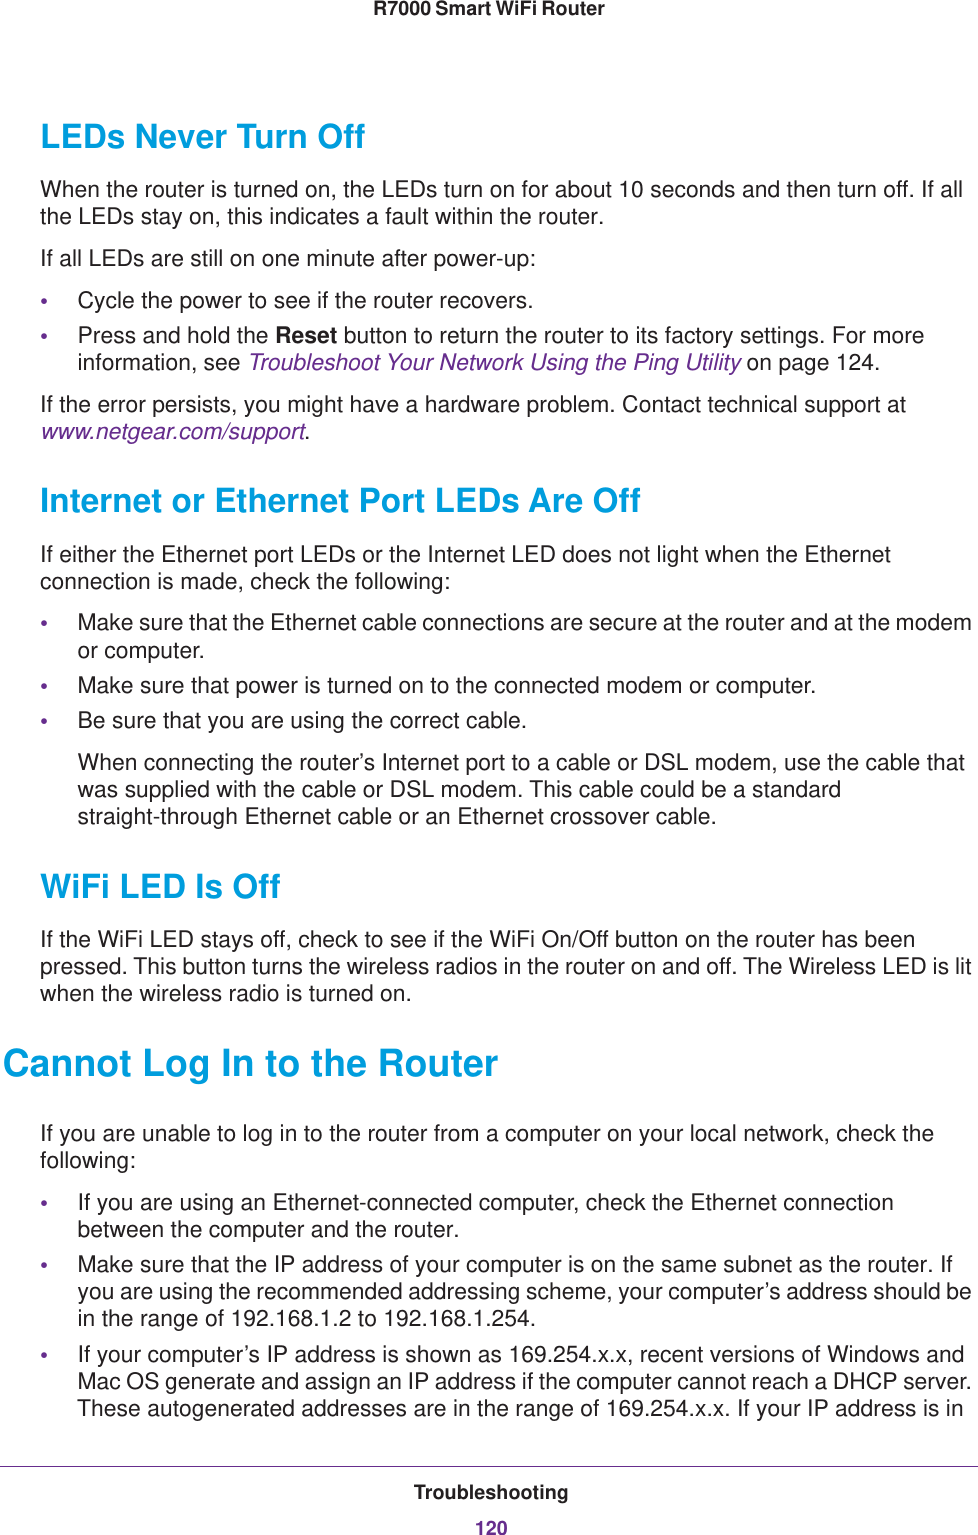 Troubleshooting120R7000 Smart WiFi Router LEDs Never Turn OffWhen the router is turned on, the LEDs turn on for about 10 seconds and then turn off. If all the LEDs stay on, this indicates a fault within the router.If all LEDs are still on one minute after power-up:•Cycle the power to see if the router recovers.•Press and hold the Reset button to return the router to its factory settings. For more information, see Troubleshoot Your Network Using the Ping Utility on page  124.If the error persists, you might have a hardware problem. Contact technical support at www.netgear.com/support.Internet or Ethernet Port LEDs Are OffIf either the Ethernet port LEDs or the Internet LED does not light when the Ethernet connection is made, check the following:•Make sure that the Ethernet cable connections are secure at the router and at the modem or computer.•Make sure that power is turned on to the connected modem or computer.•Be sure that you are using the correct cable.When connecting the router’s Internet port to a cable or DSL modem, use the cable that was supplied with the cable or DSL modem. This cable could be a standard straight-through Ethernet cable or an Ethernet crossover cable.WiFi LED Is OffIf the WiFi LED stays off, check to see if the WiFi On/Off button on the router has been pressed. This button turns the wireless radios in the router on and off. The Wireless LED is lit when the wireless radio is turned on.Cannot Log In to the RouterIf you are unable to log in to the router from a computer on your local network, check the following:•If you are using an Ethernet-connected computer, check the Ethernet connection between the computer and the router.•Make sure that the IP address of your computer is on the same subnet as the router. If you are using the recommended addressing scheme, your computer’s address should be in the range of 192.168.1.2 to 192.168.1.254. •If your computer’s IP address is shown as 169.254.x.x, recent versions of Windows and Mac OS generate and assign an IP address if the computer cannot reach a DHCP server. These autogenerated addresses are in the range of 169.254.x.x. If your IP address is in 